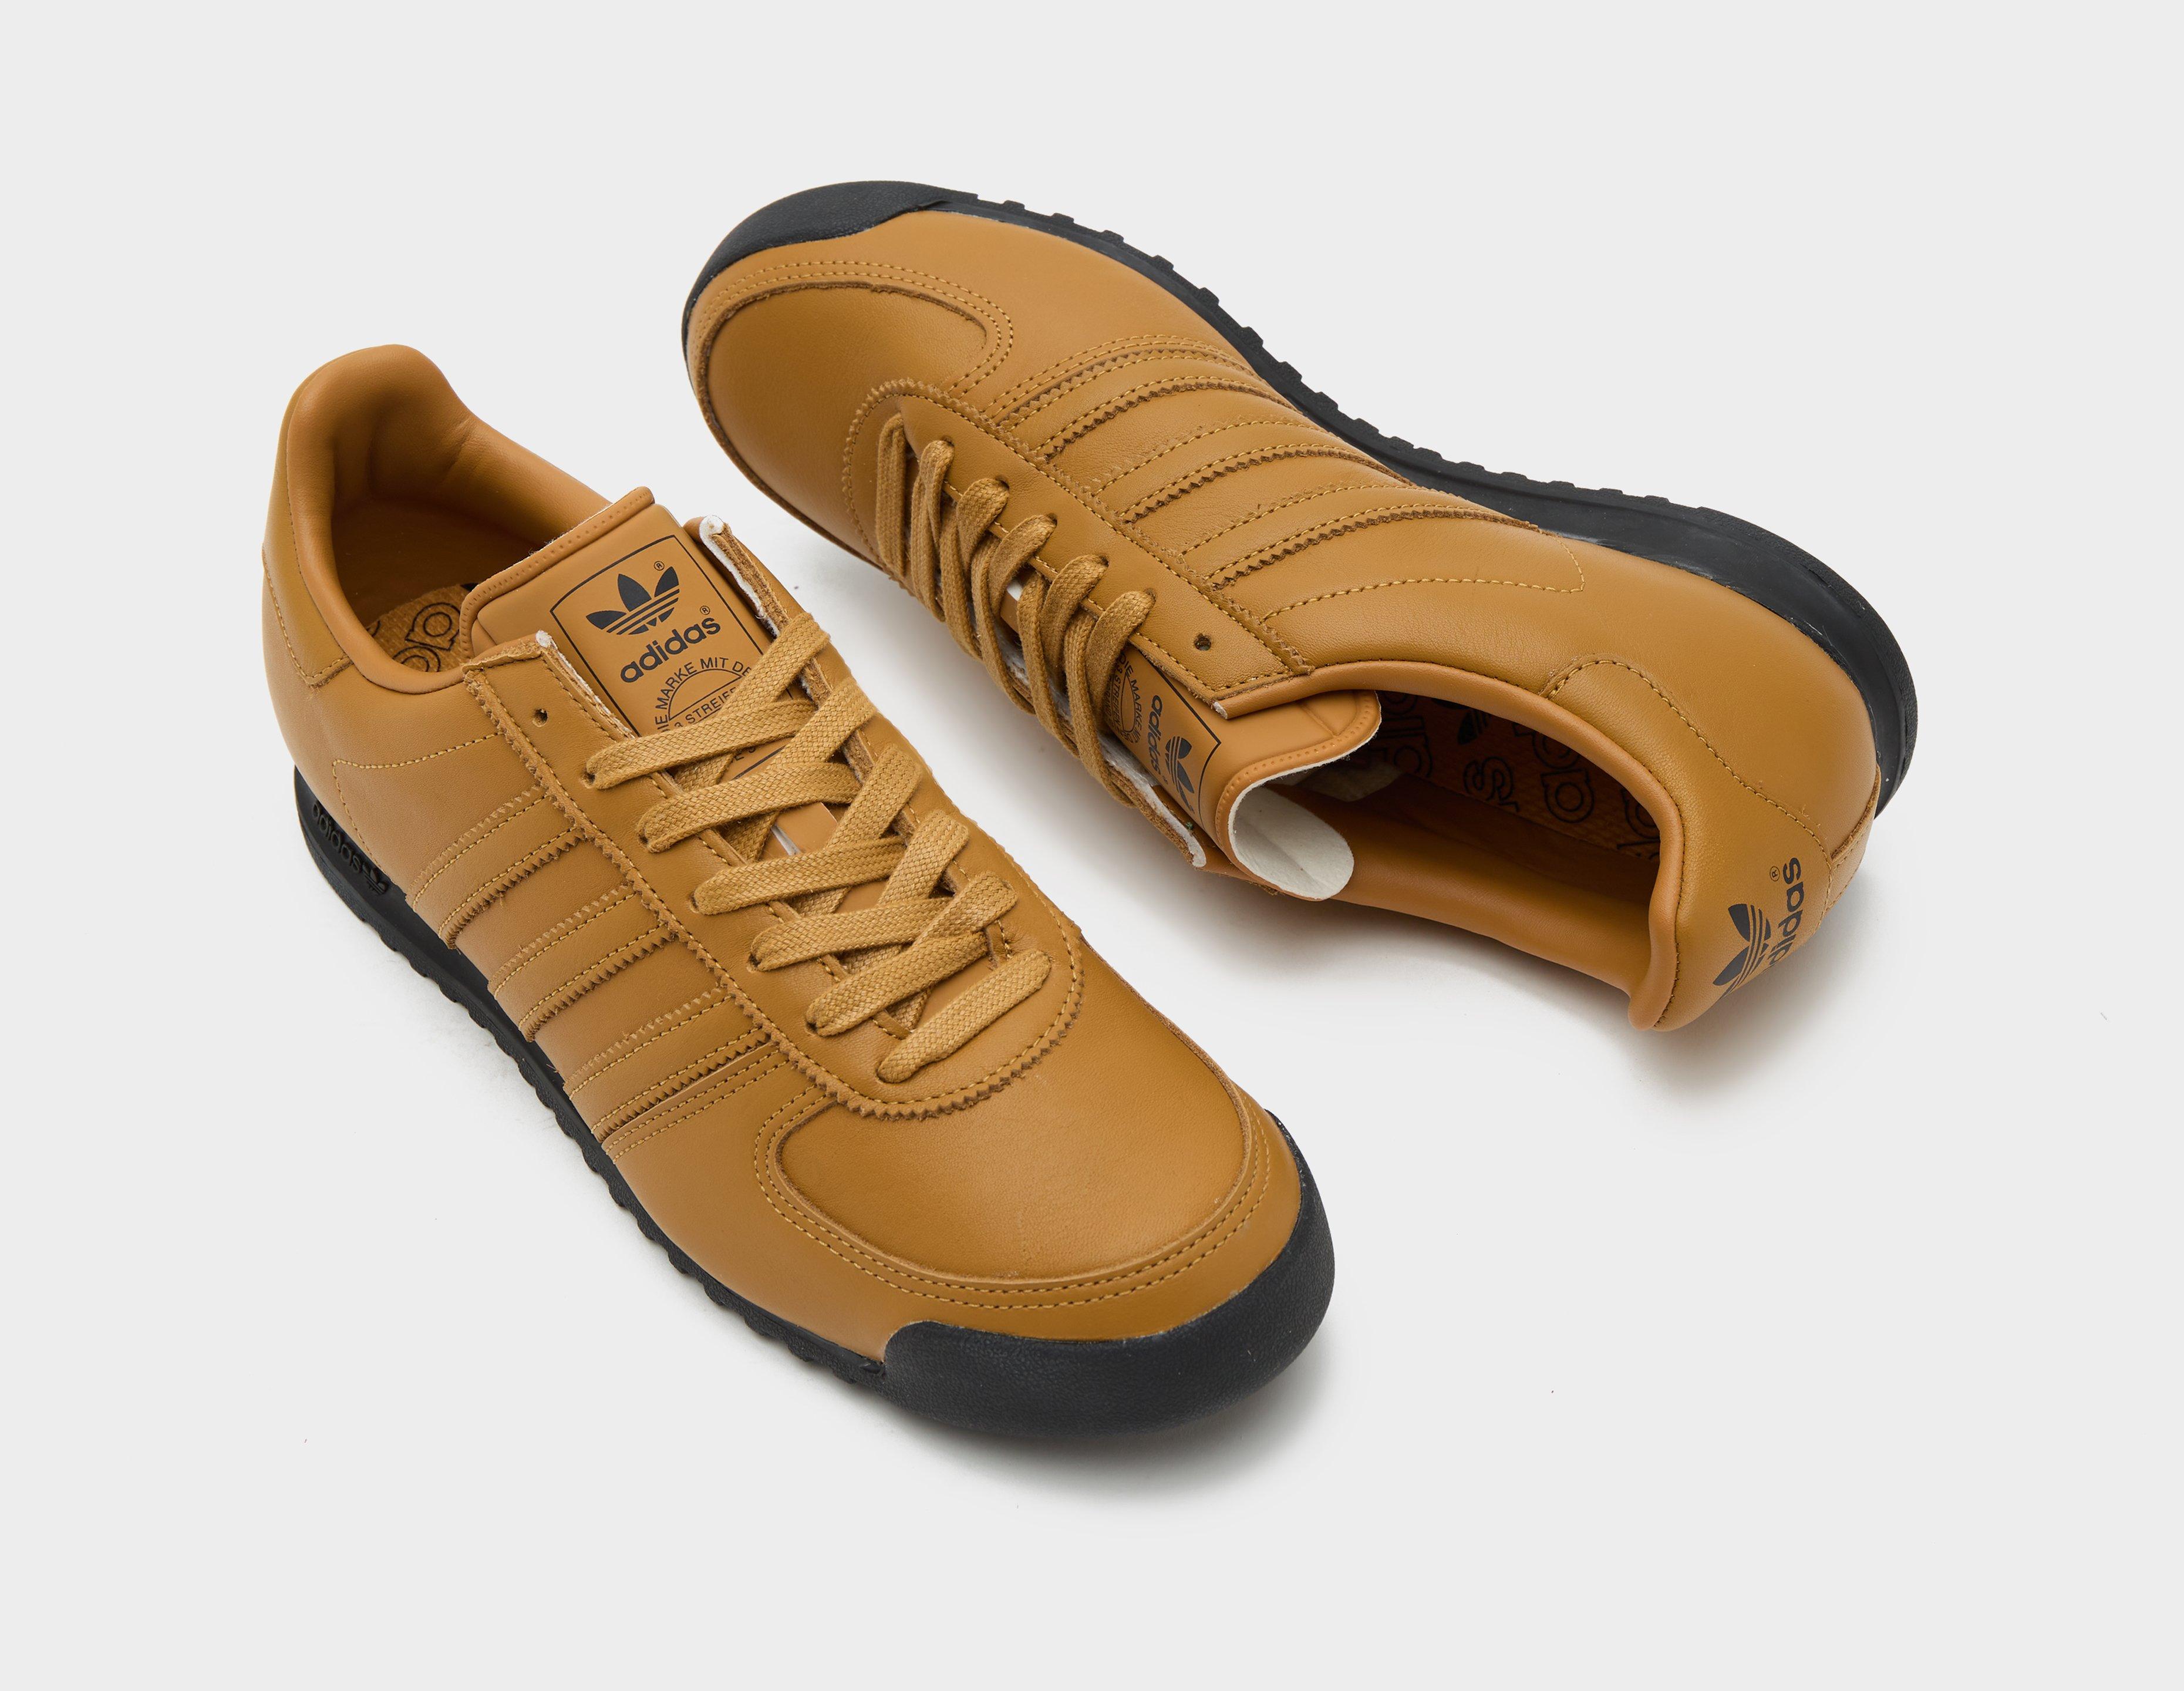 exclusive Women\'s | puma sale Brown Originals - brands shoes and - adidas women adidas All Archive dress for Healthdesign? dress Team